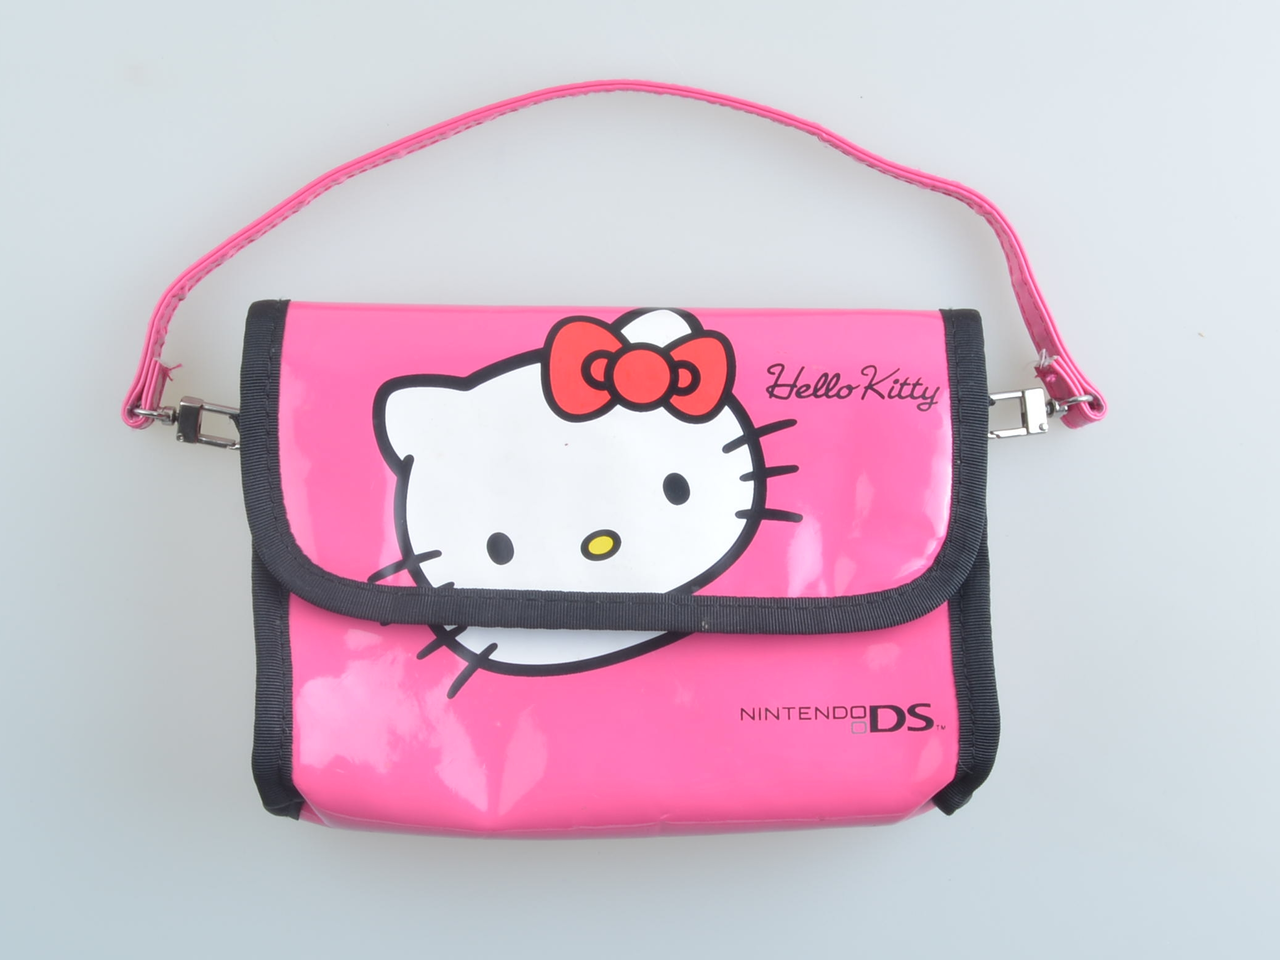 Helly Kitty Nintendo DS Bag - Pink - Nintendo DS Hardware